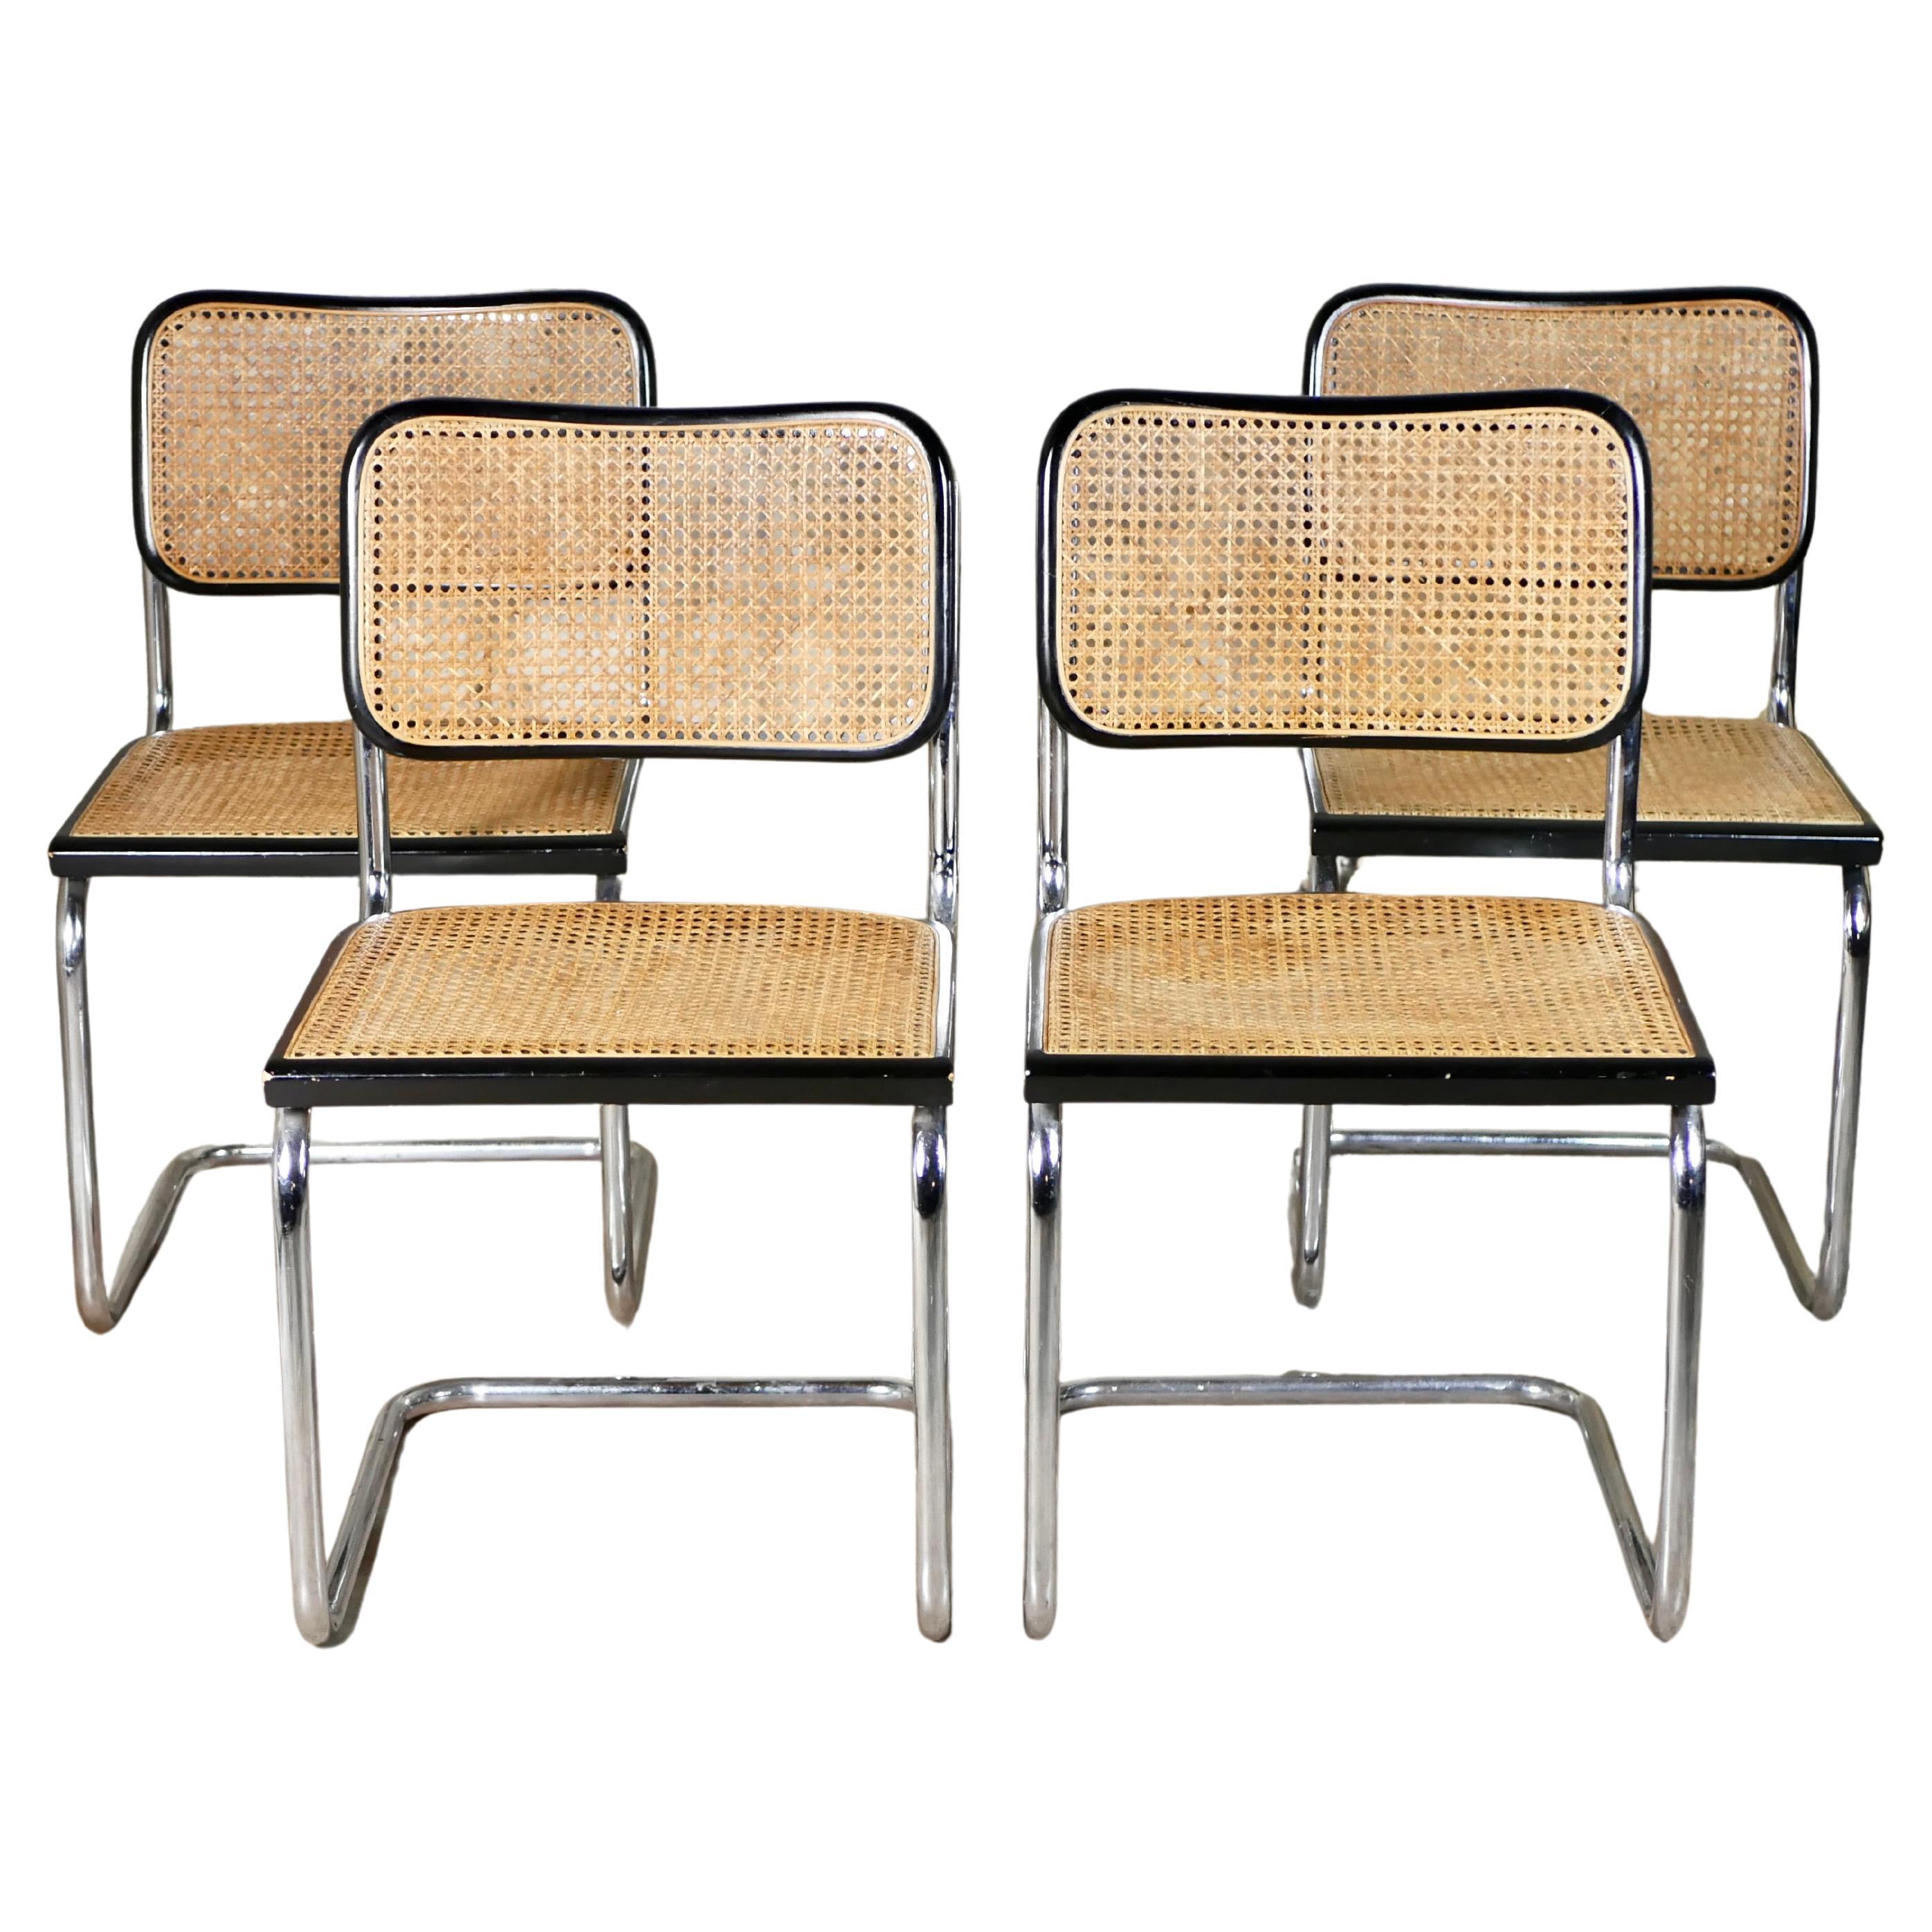 Set of 4 Cesca chairs designed by Marcel Breuer, made in Italy, 1970